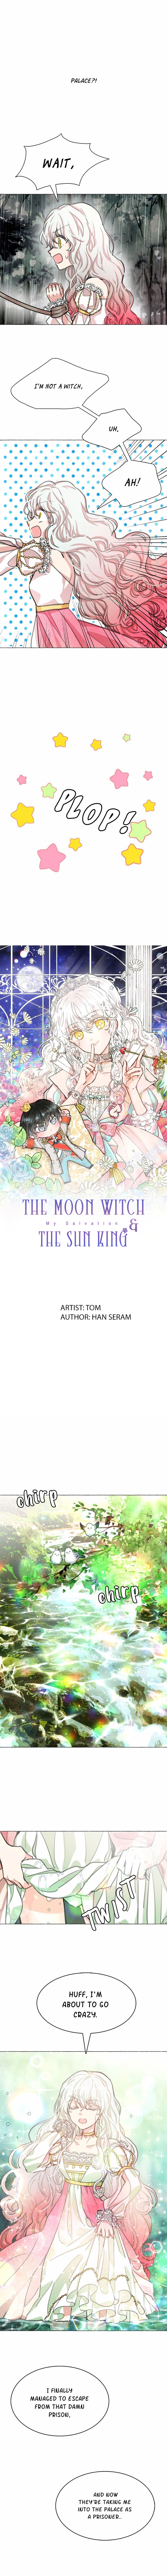 The Moon Witch And The Sun King: My Salvation - Page 1